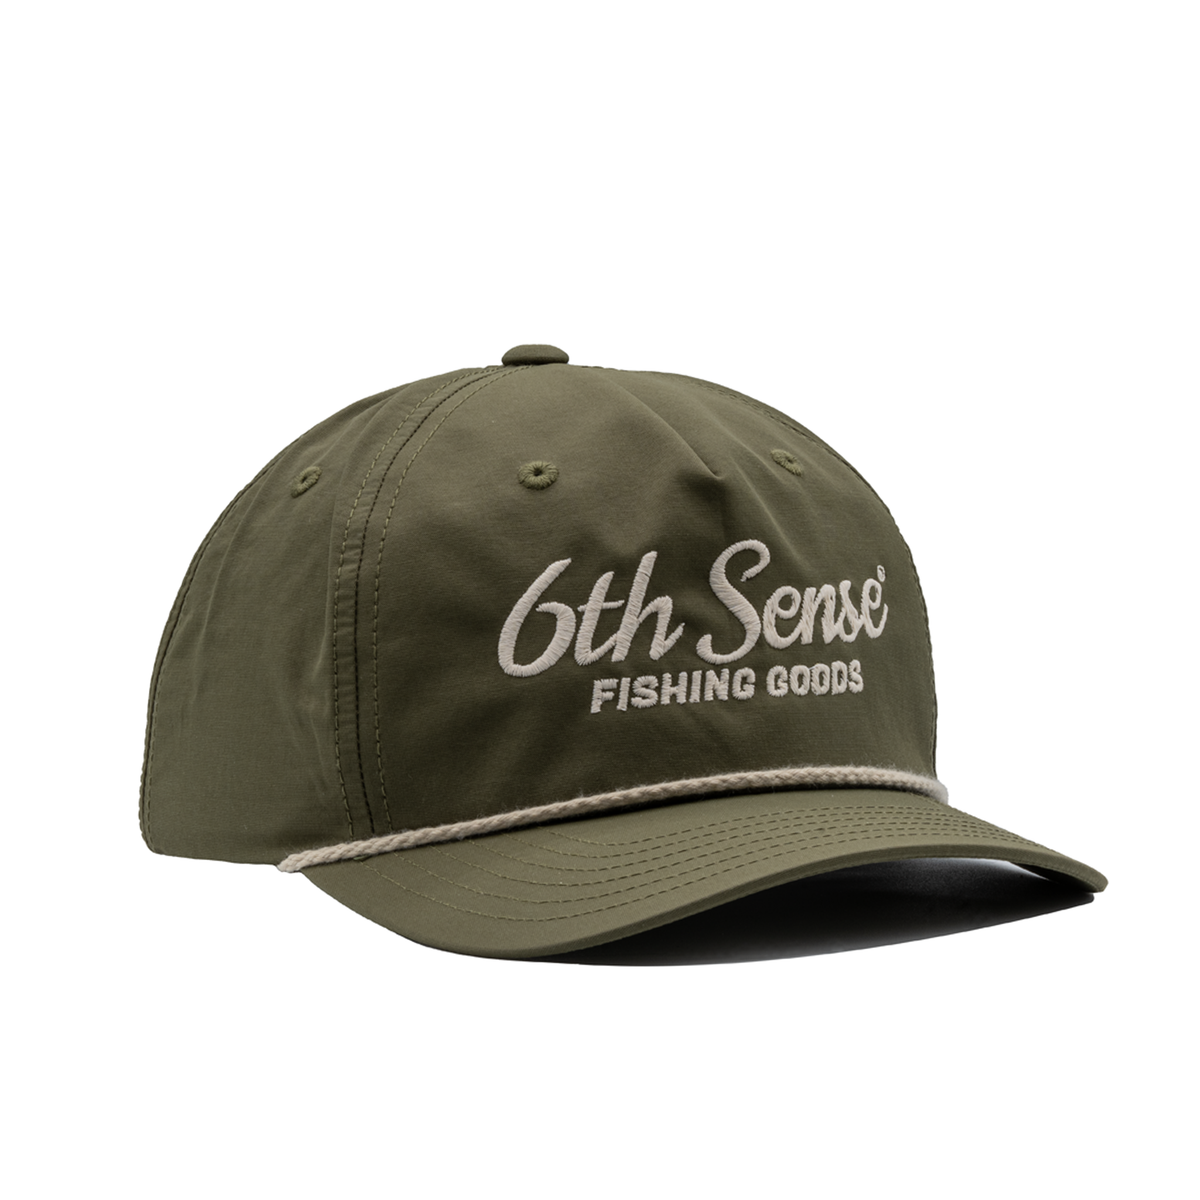 6th Sense Fishing - A couple of our favorites out of the 6th Sense snapback  hat collection. #bass #6thsensefishing #6thsense #fish #lake #water  #bassfishing #fishing #hat #apparel